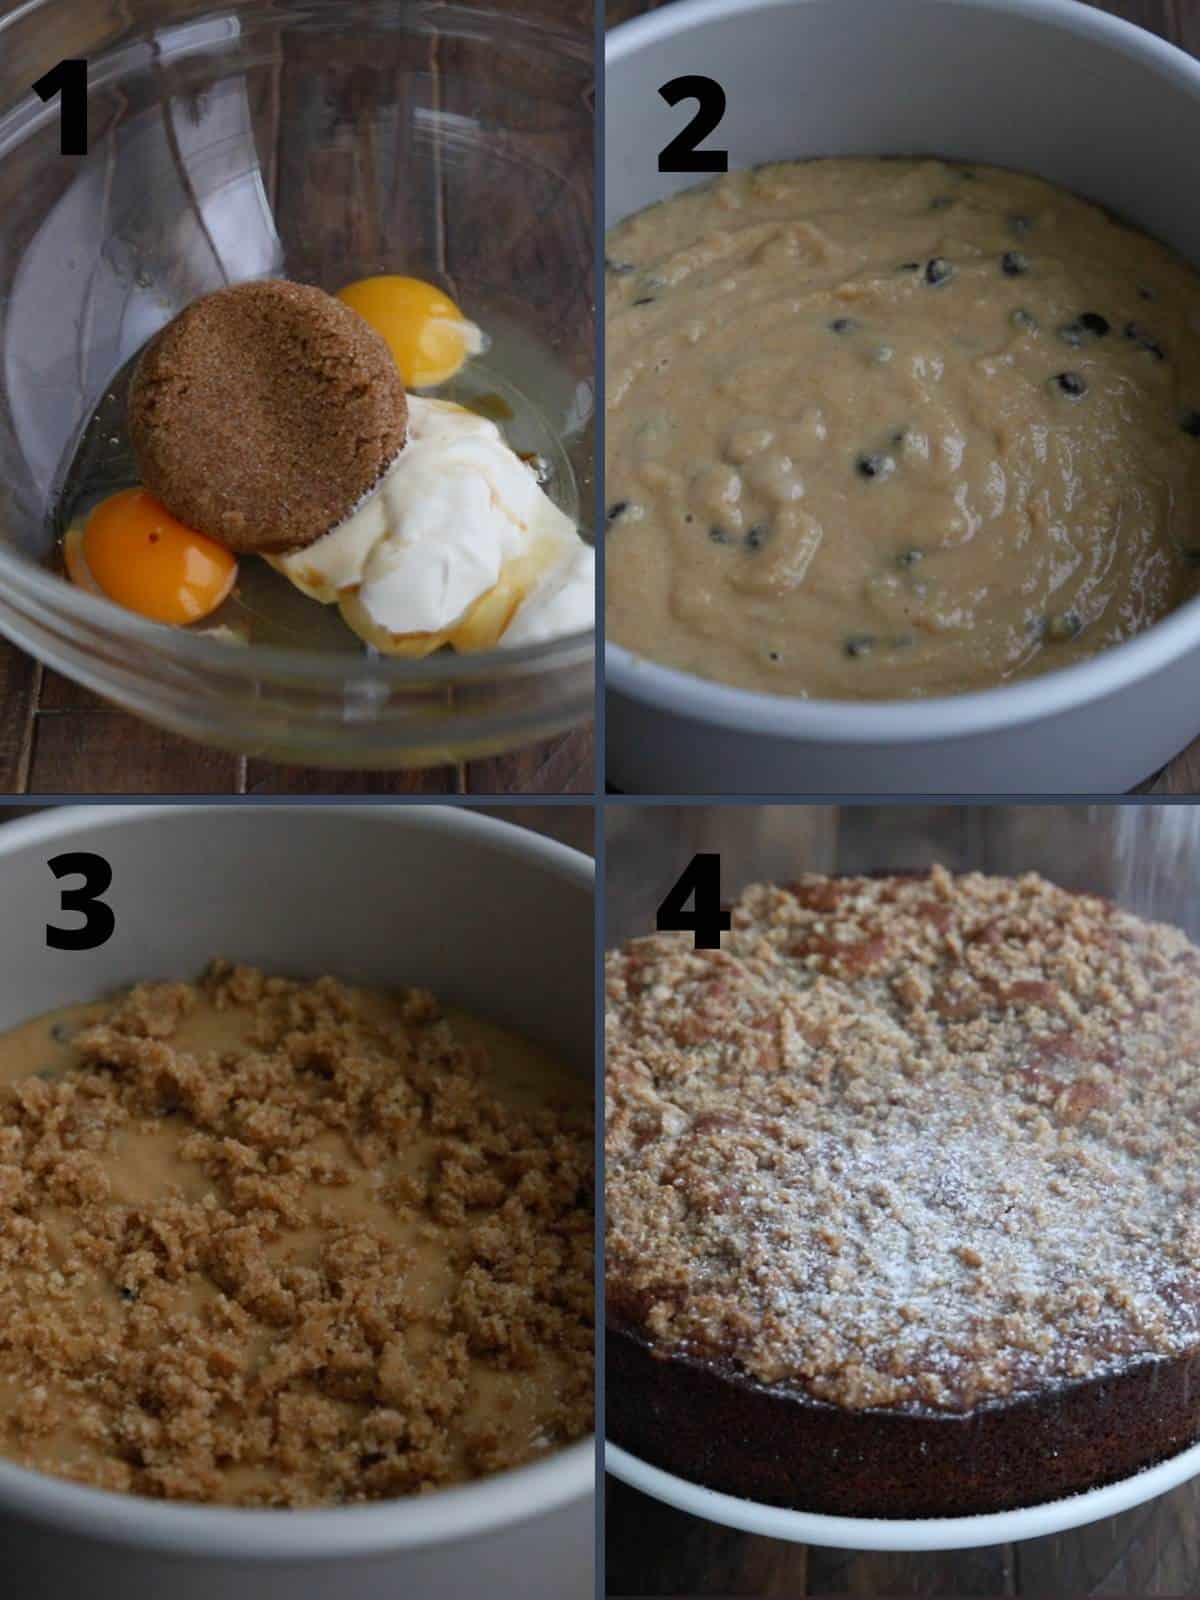 A collage of 4 images showing the steps for making Keto Sour Cream Coffee Cake.